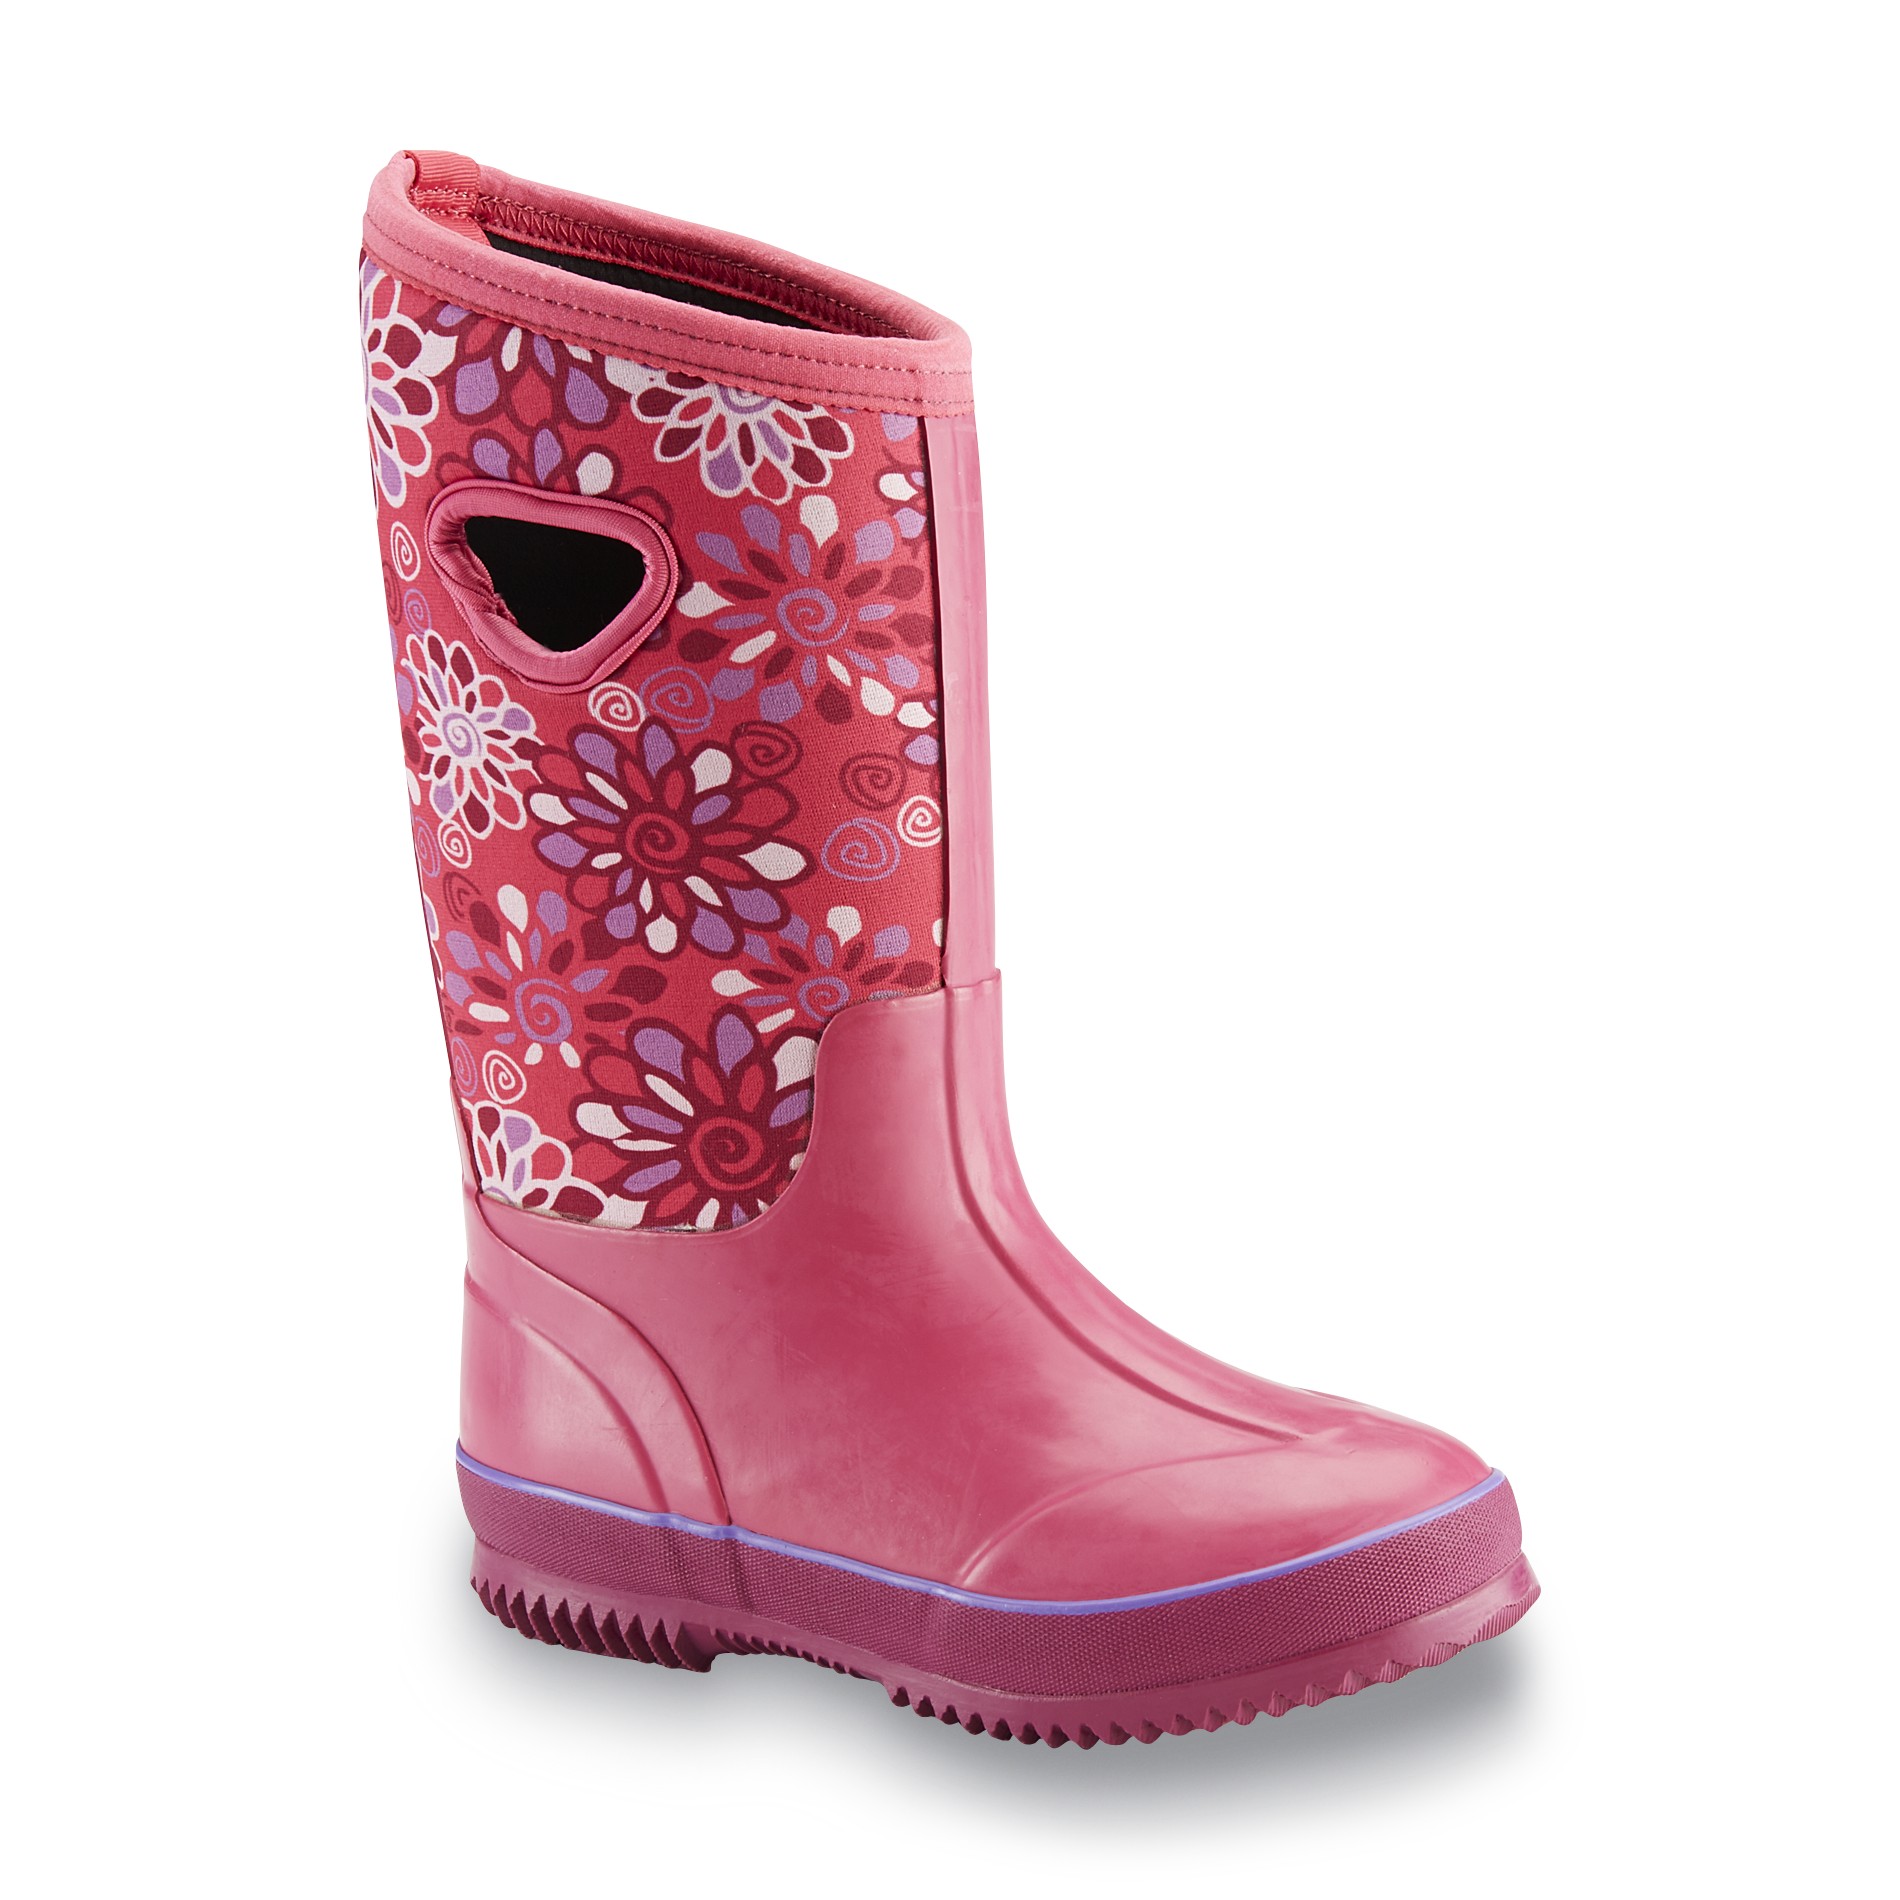 Athletech Girl's Bobby Pink Weather Boot